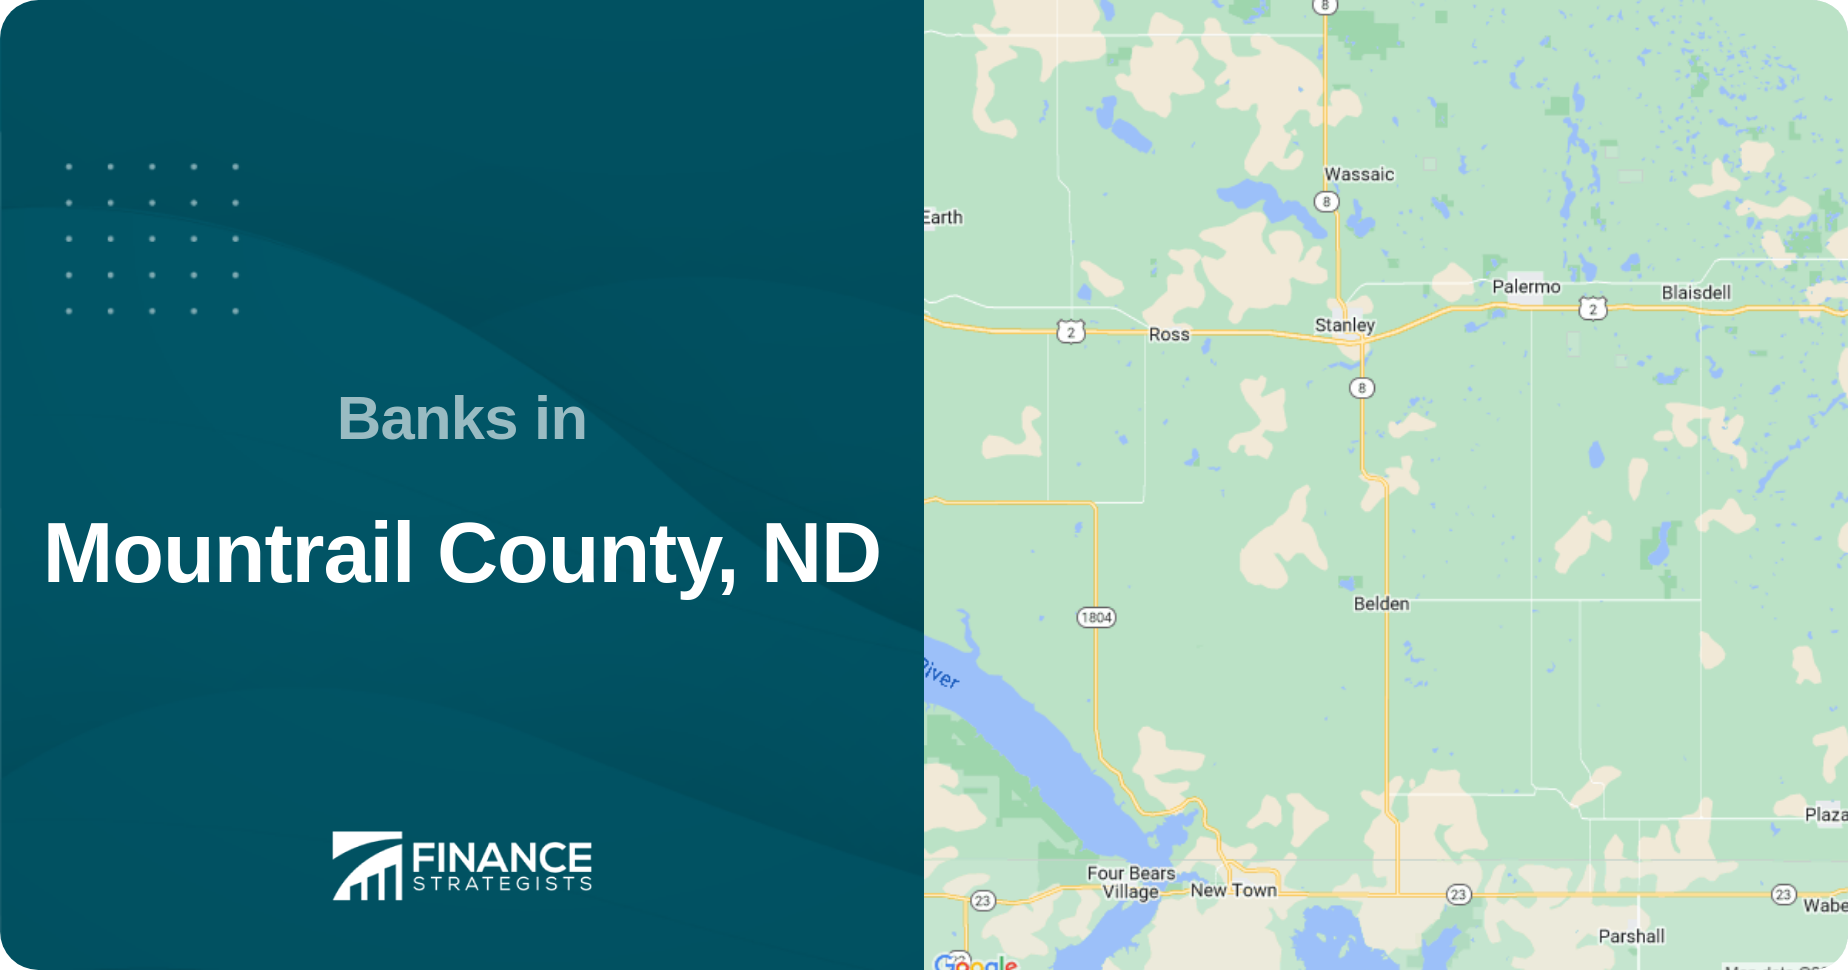 Banks in Mountrail County, ND